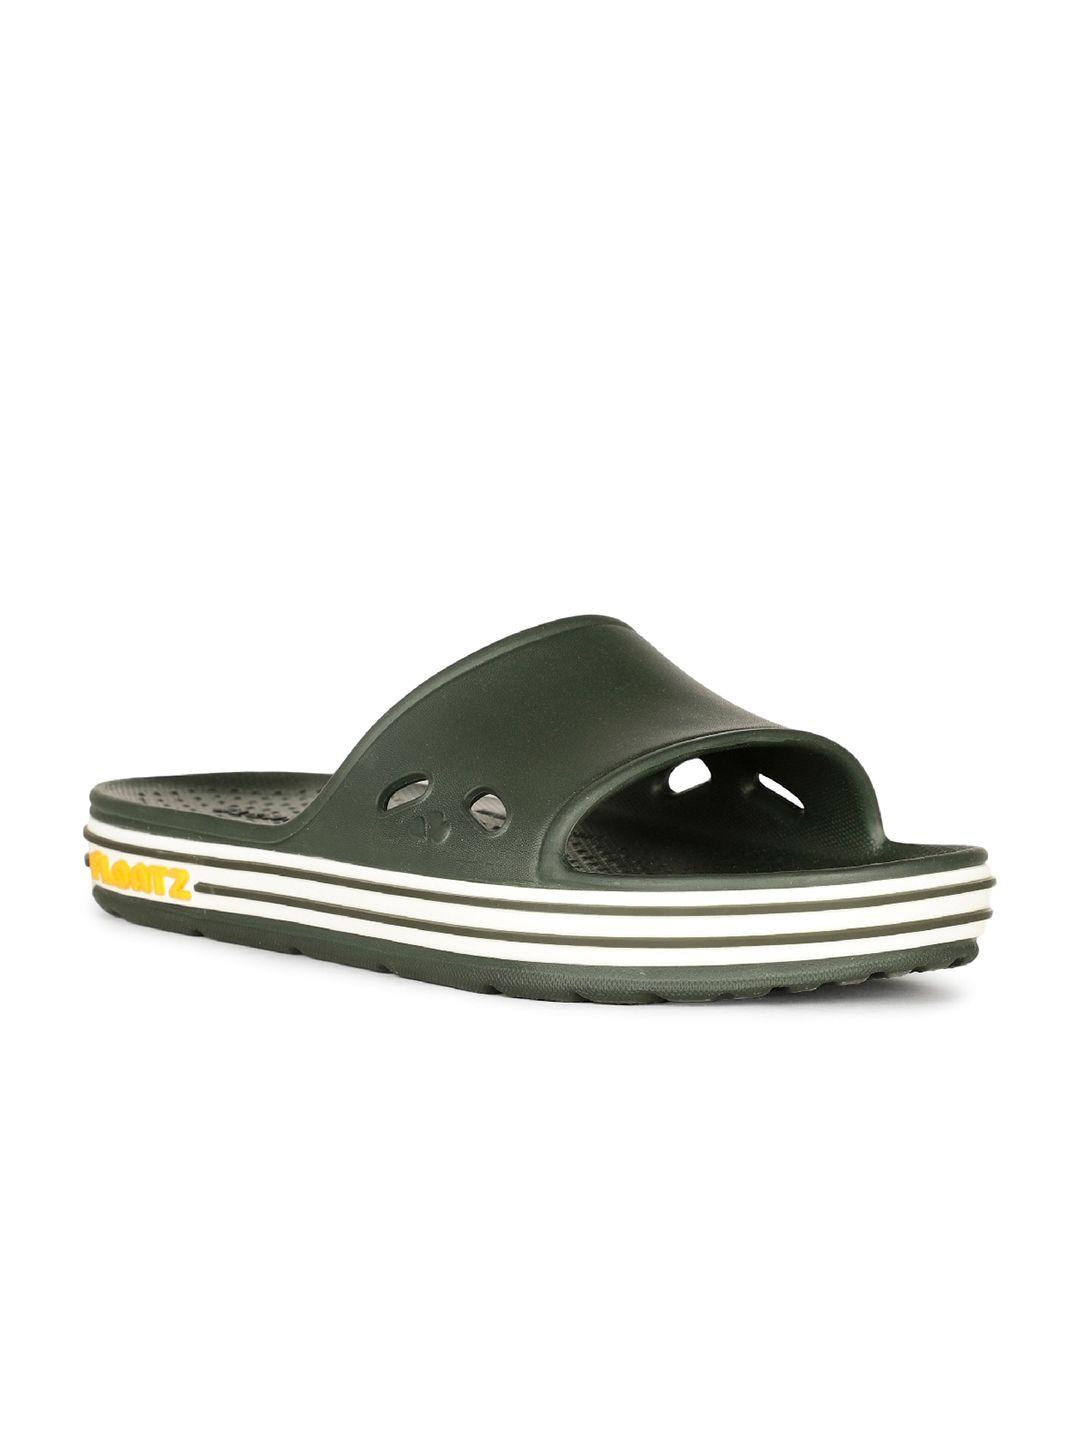 bata boys rubber sliders with laser cuts